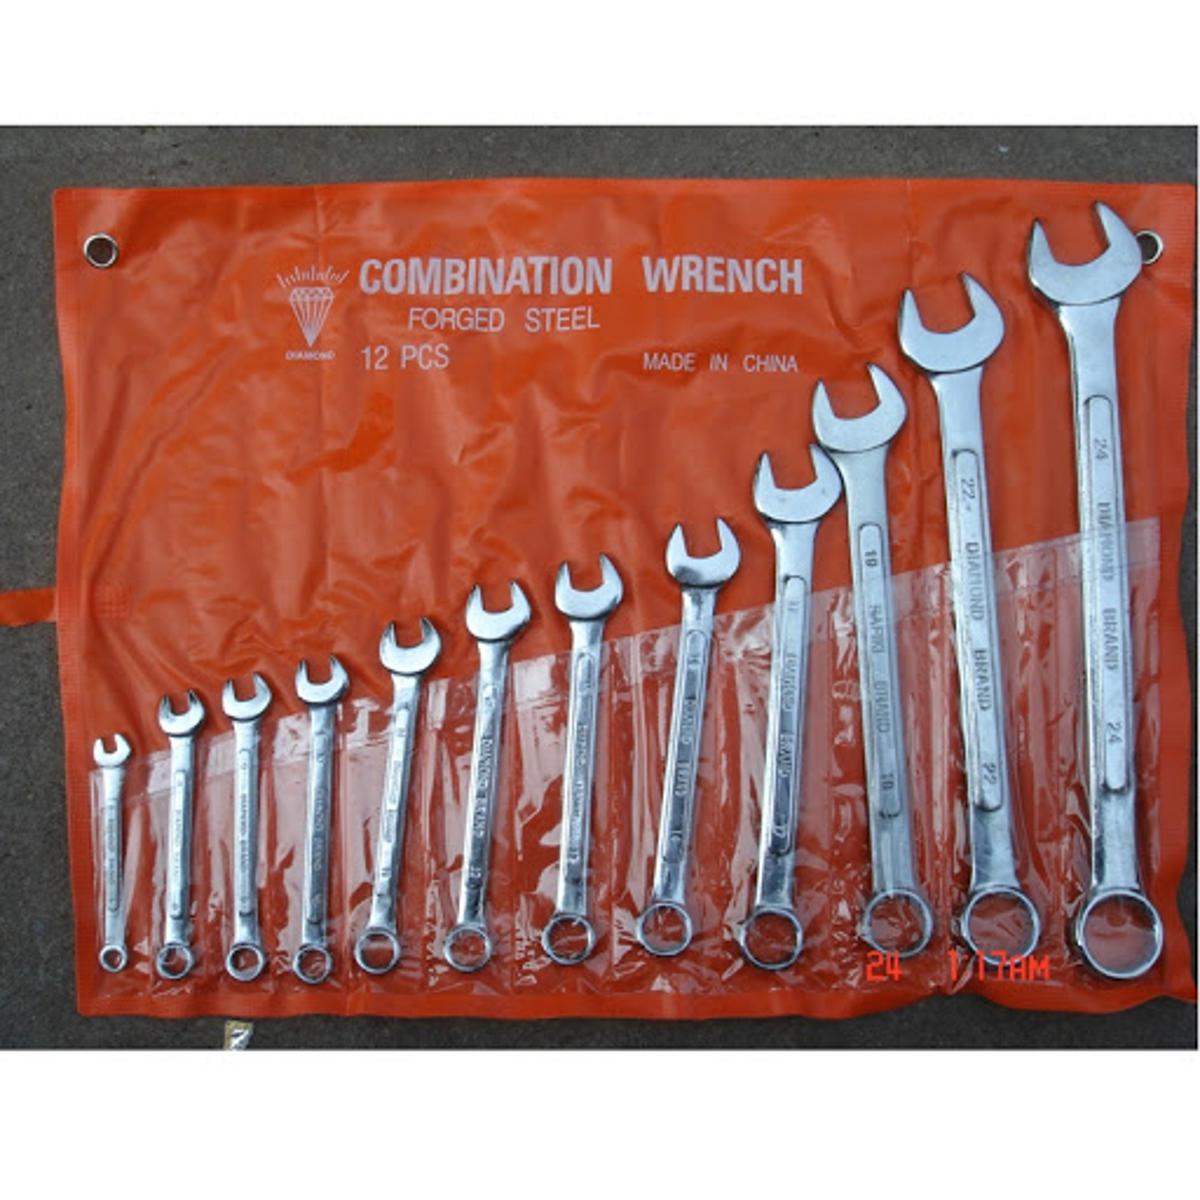 Complete Set of 12 Key Ratchet Spanners Combination Wrenches Of Auto Repair Hand Tool For Cars Kit Ring Fix Spanner ??? Tool kit Combination Wrench Goti Pana Screw Driver Bit Hand Tools Kit Car Bike Cycle Repairing Hand Tool Toolkit 12 PC Piece